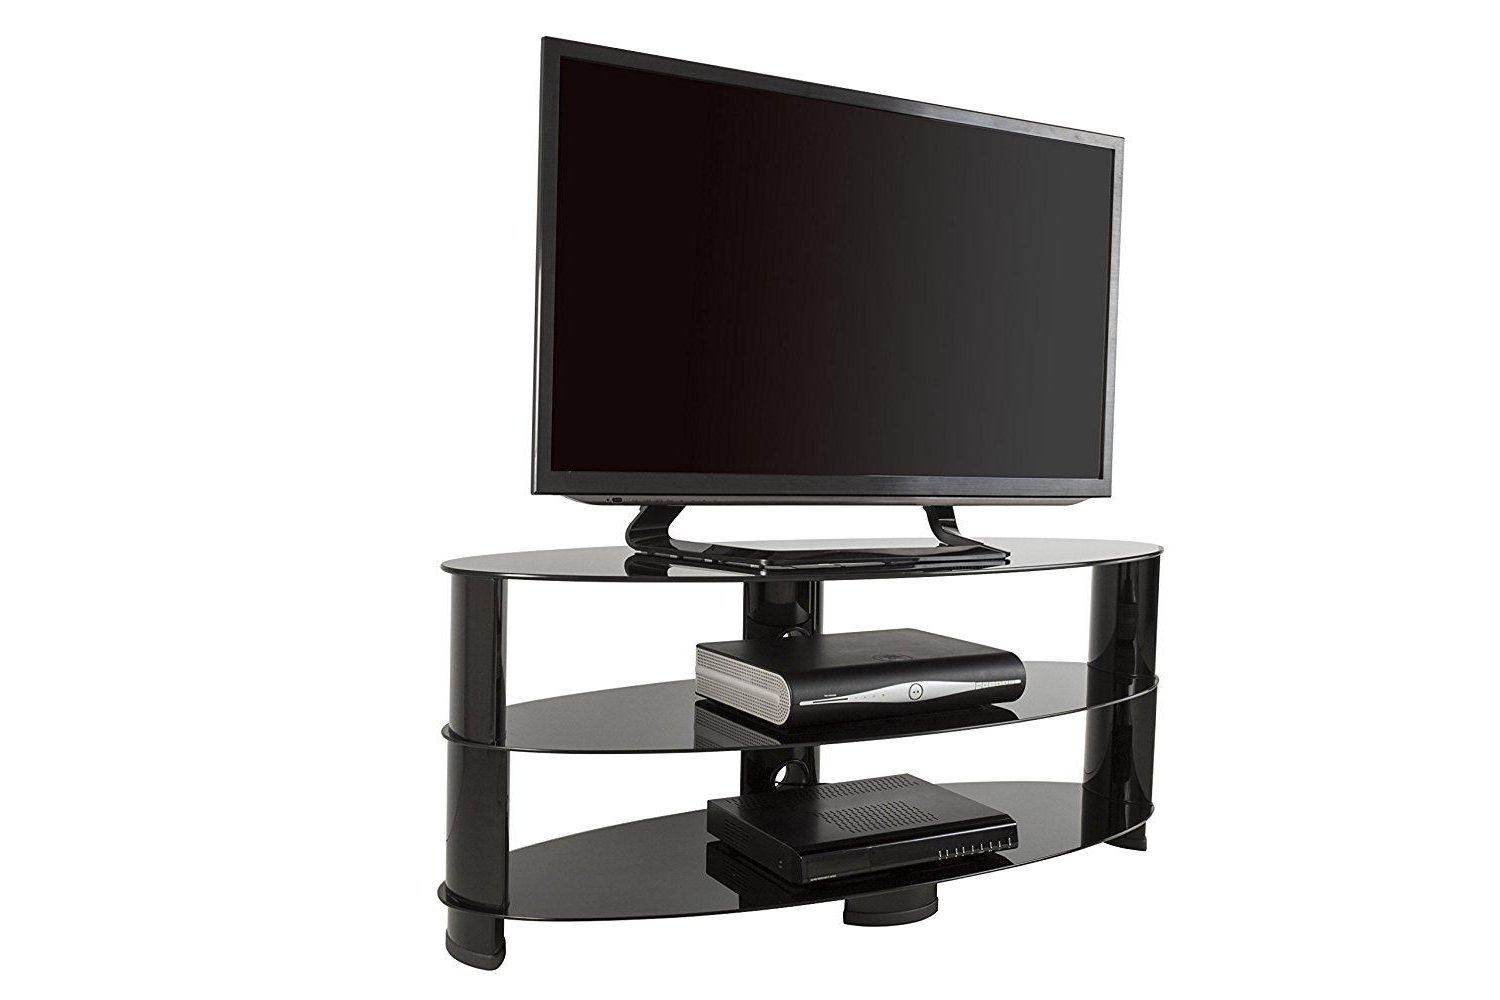 Amazon: Avf Ovl1400bb A Tv Stand With Glass Shelves With Regard To 2017 Glass Shelves Tv Stands For Tvs Up To 60" (Photo 3 of 10)